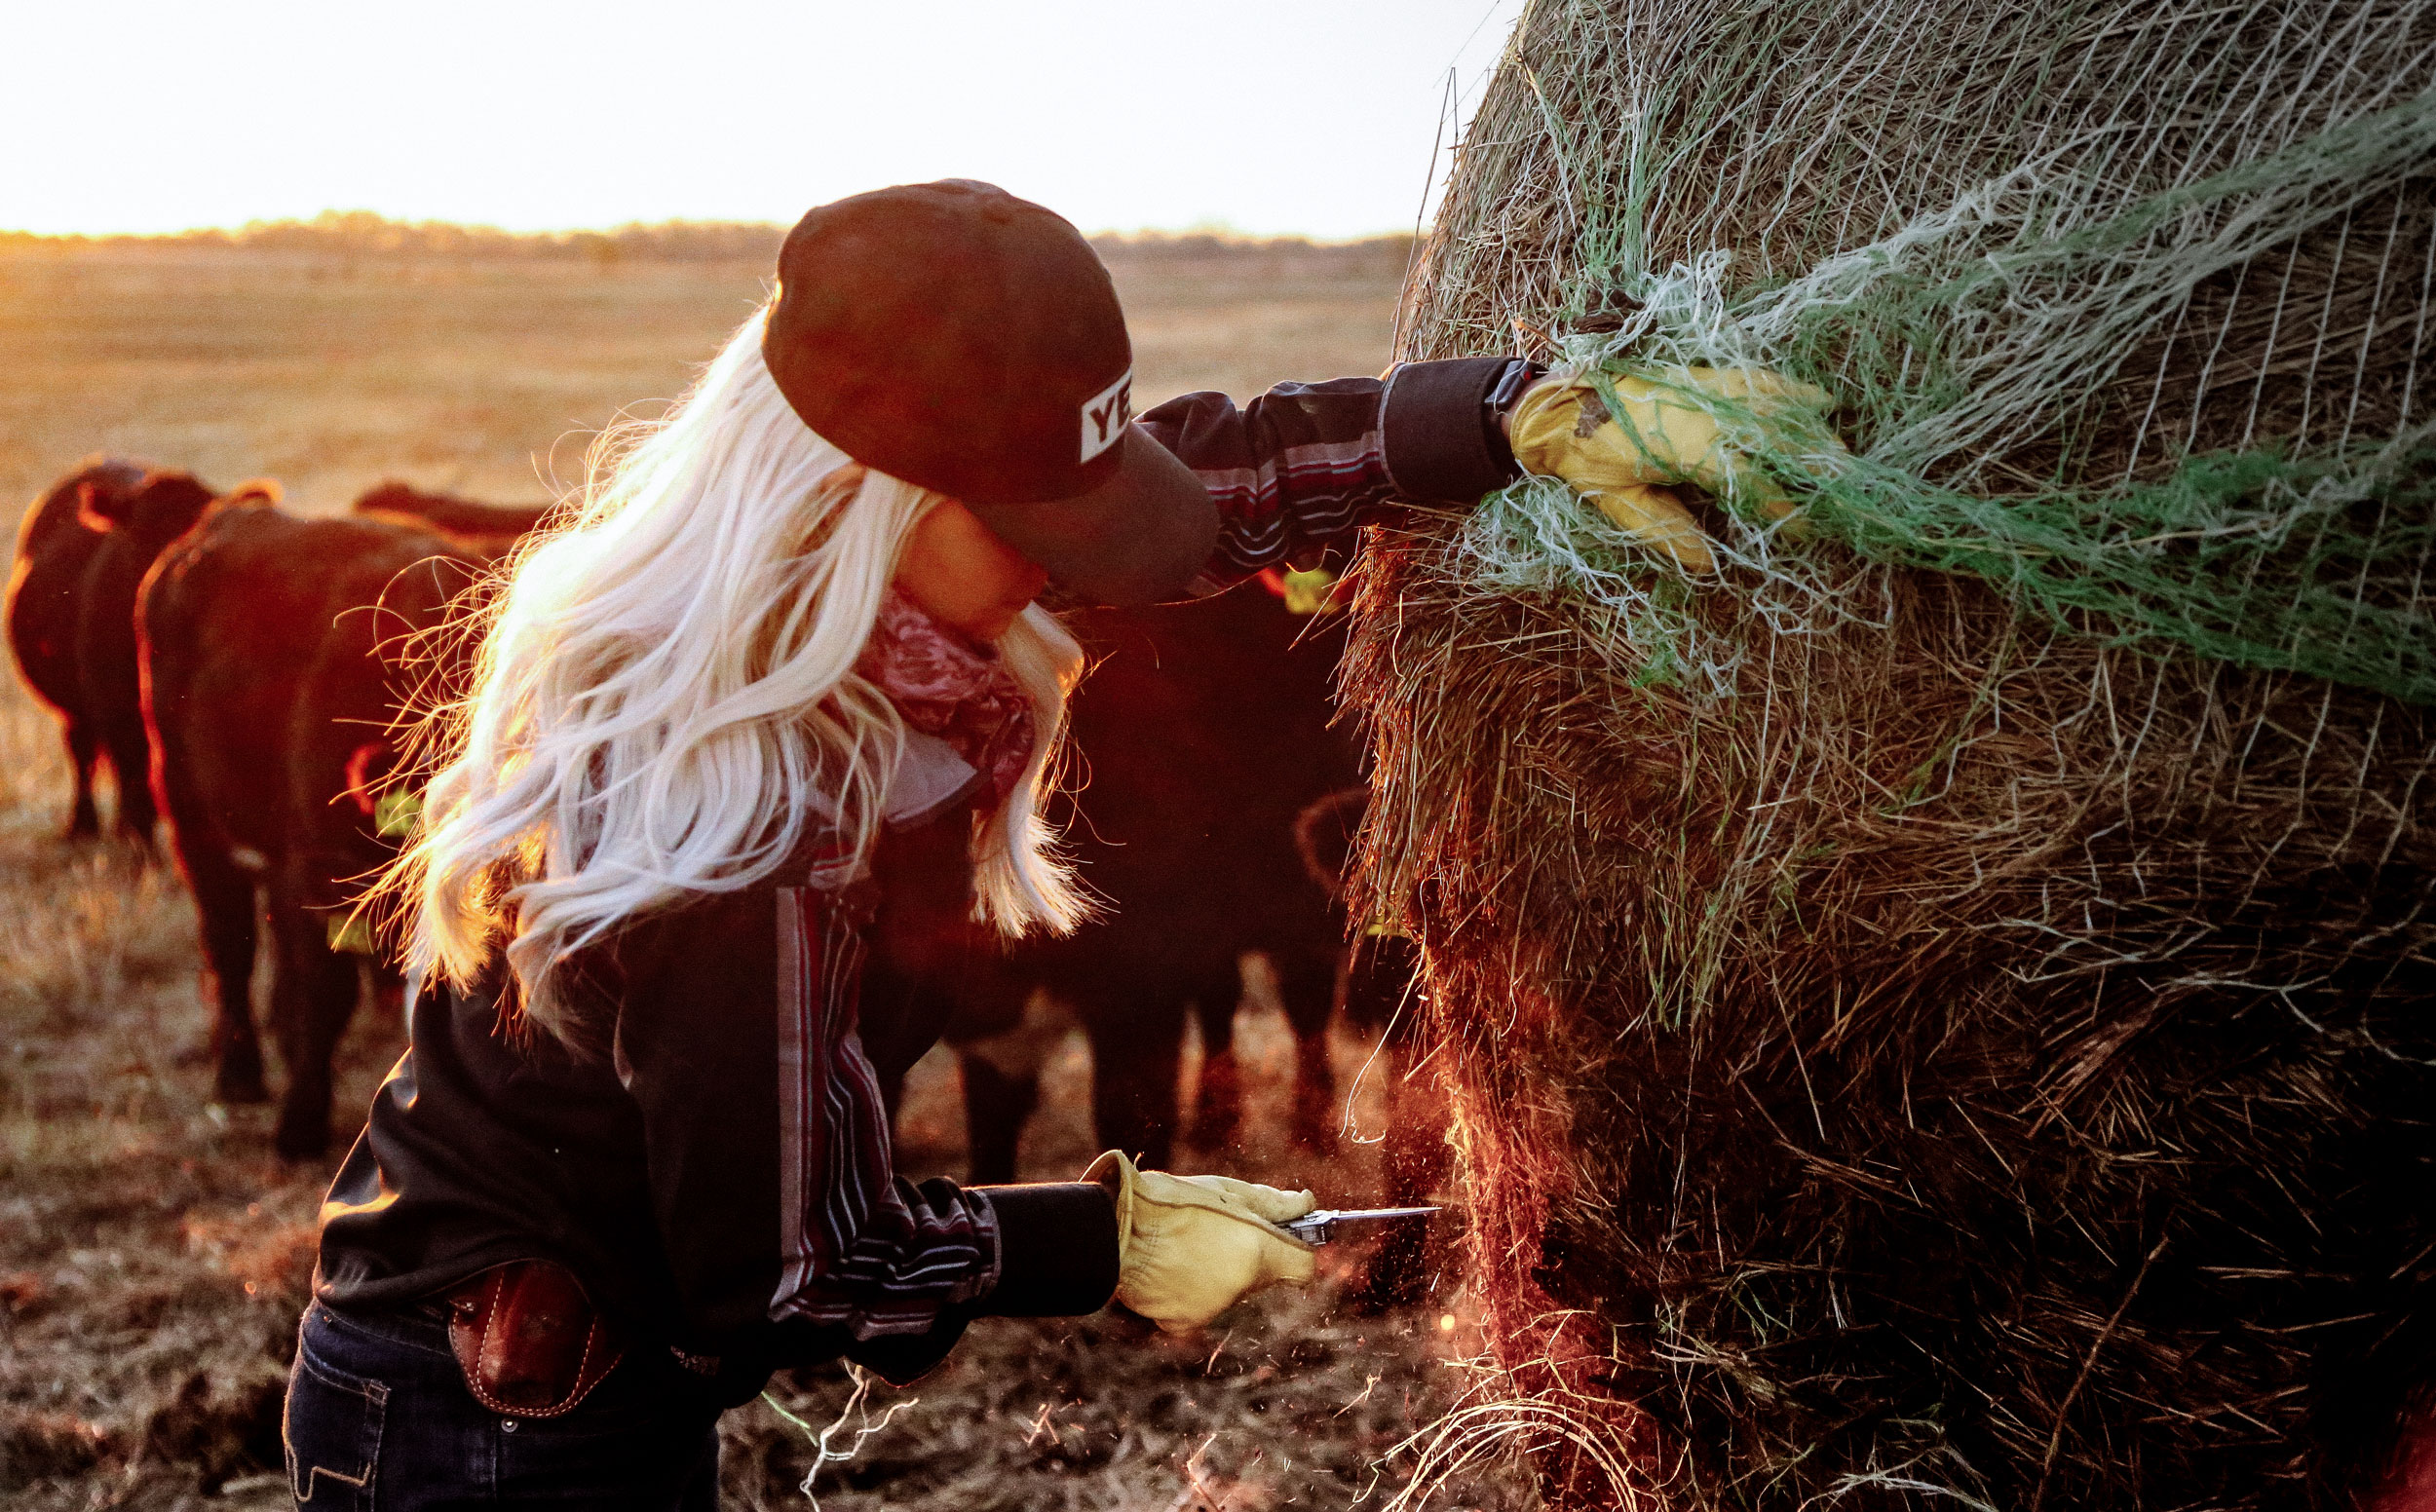 Alex Templeton preparing hay for her animals at the ranch